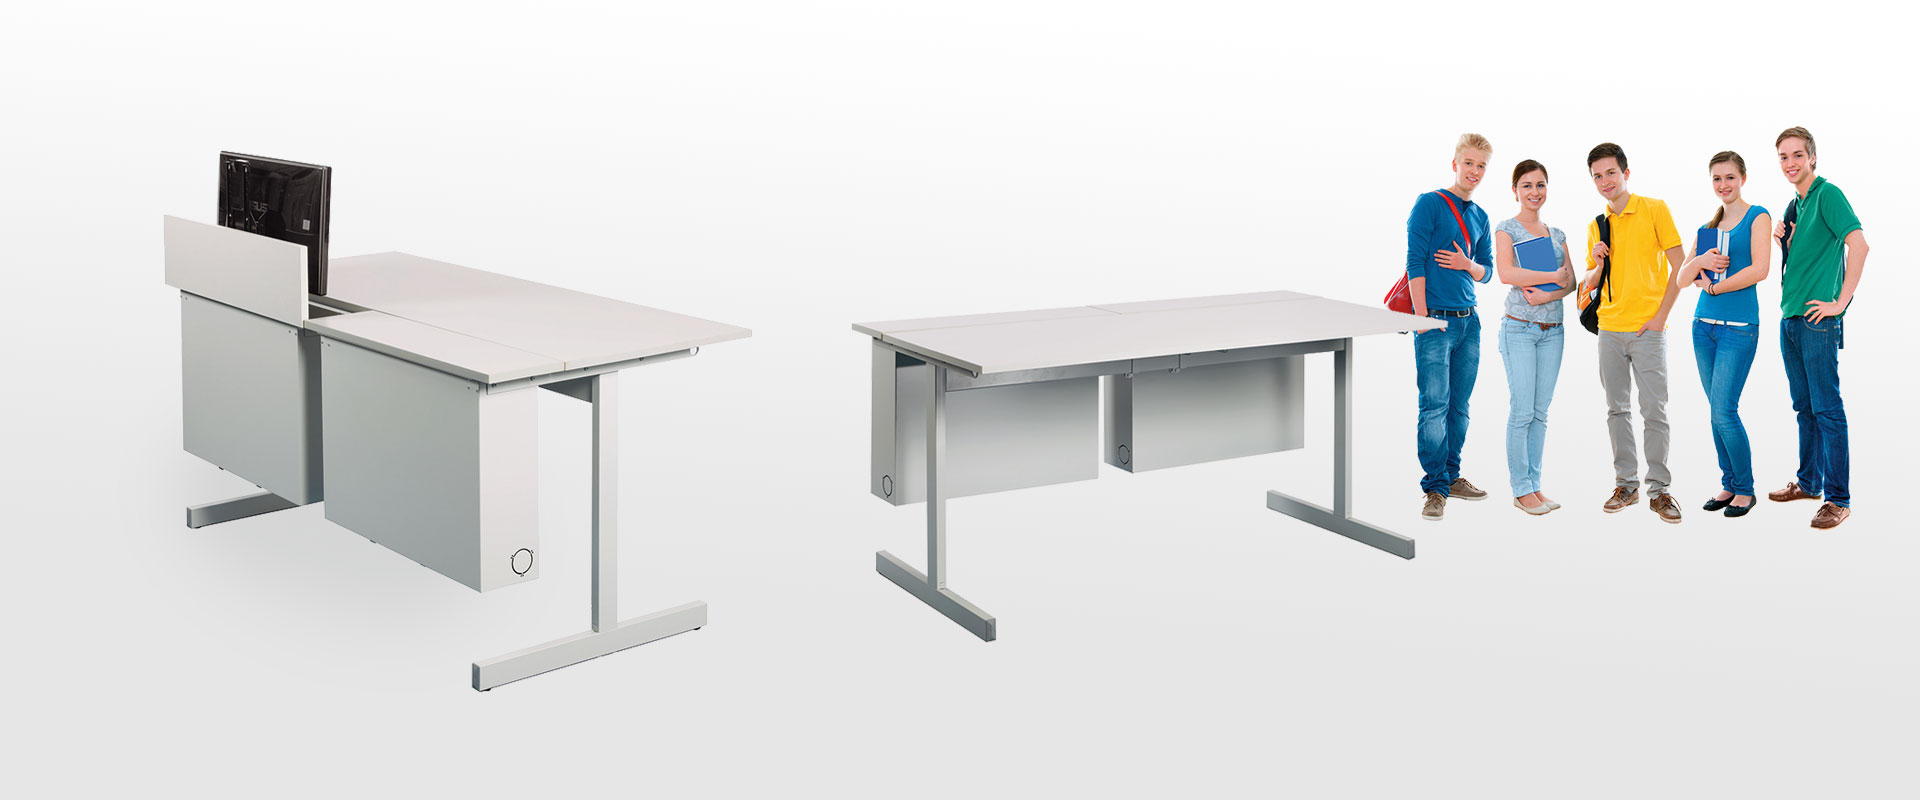 Moeckel Basic Multifunctional Tables For School And Work